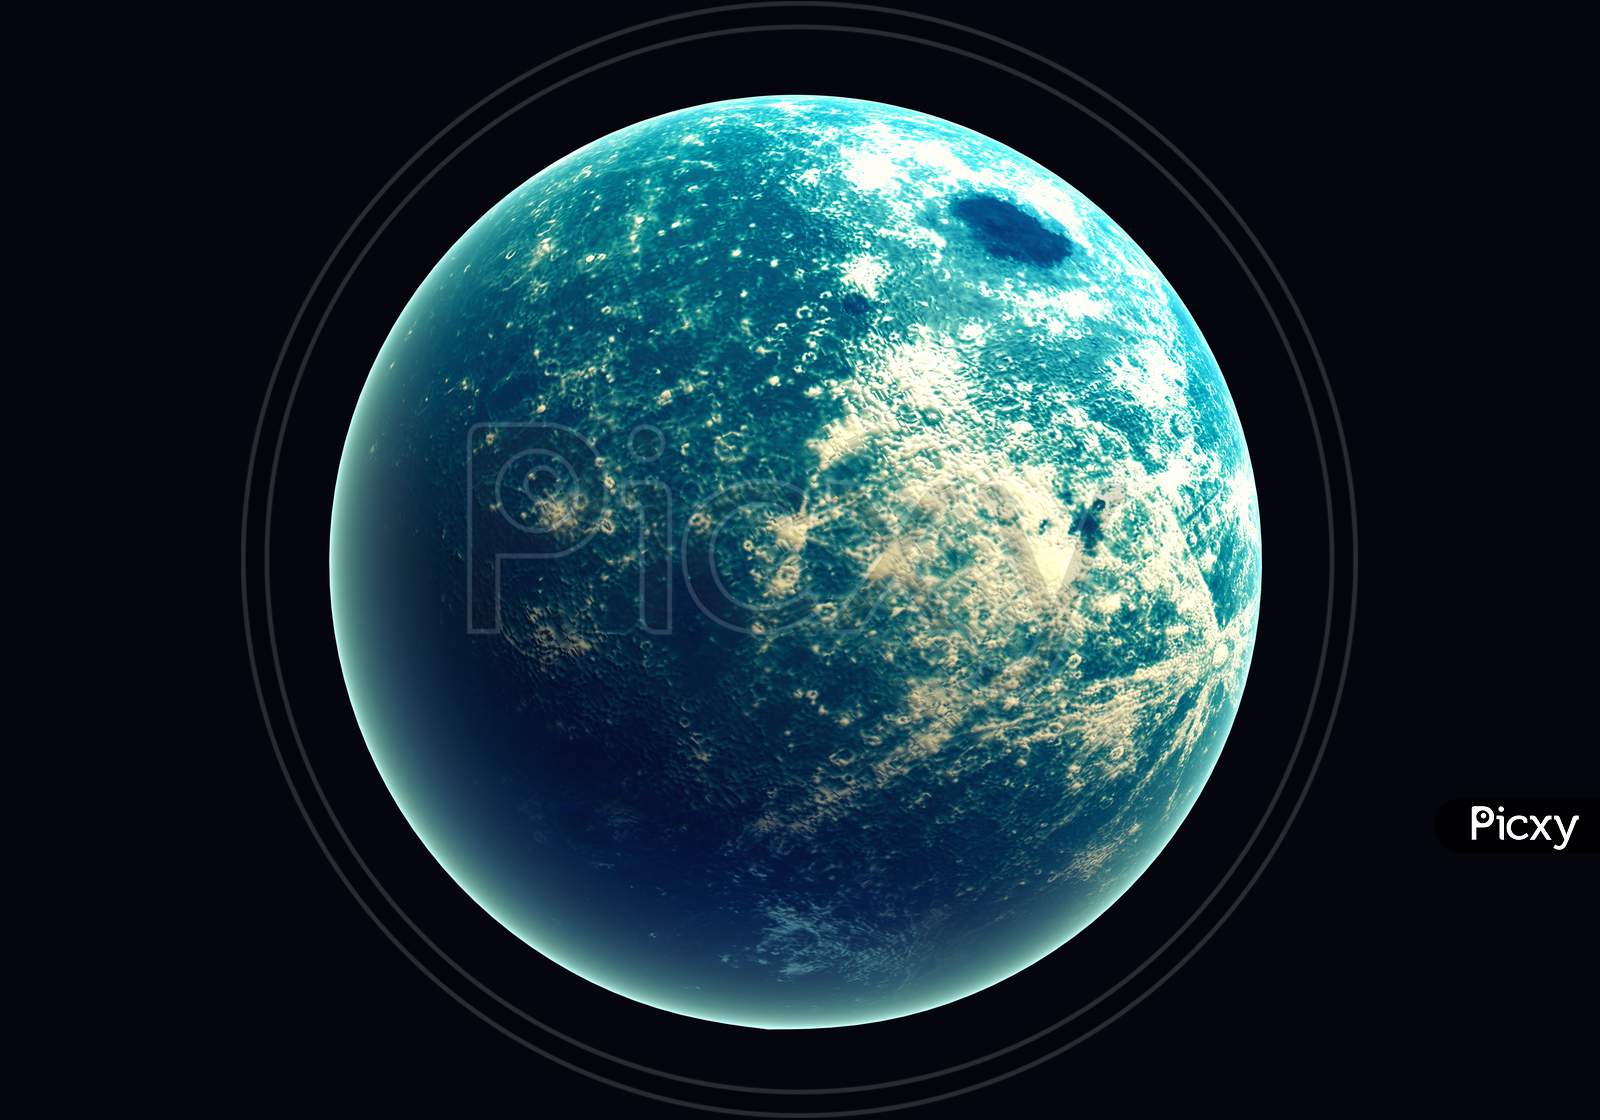 Blue Earth In Space And Galaxy. Globe With Outer Glow Ozone And White Cloud. Space Planet And Atmosphere Concept. Alien And Living Nature Theme. Elements Of This Image Furnished By Nasa